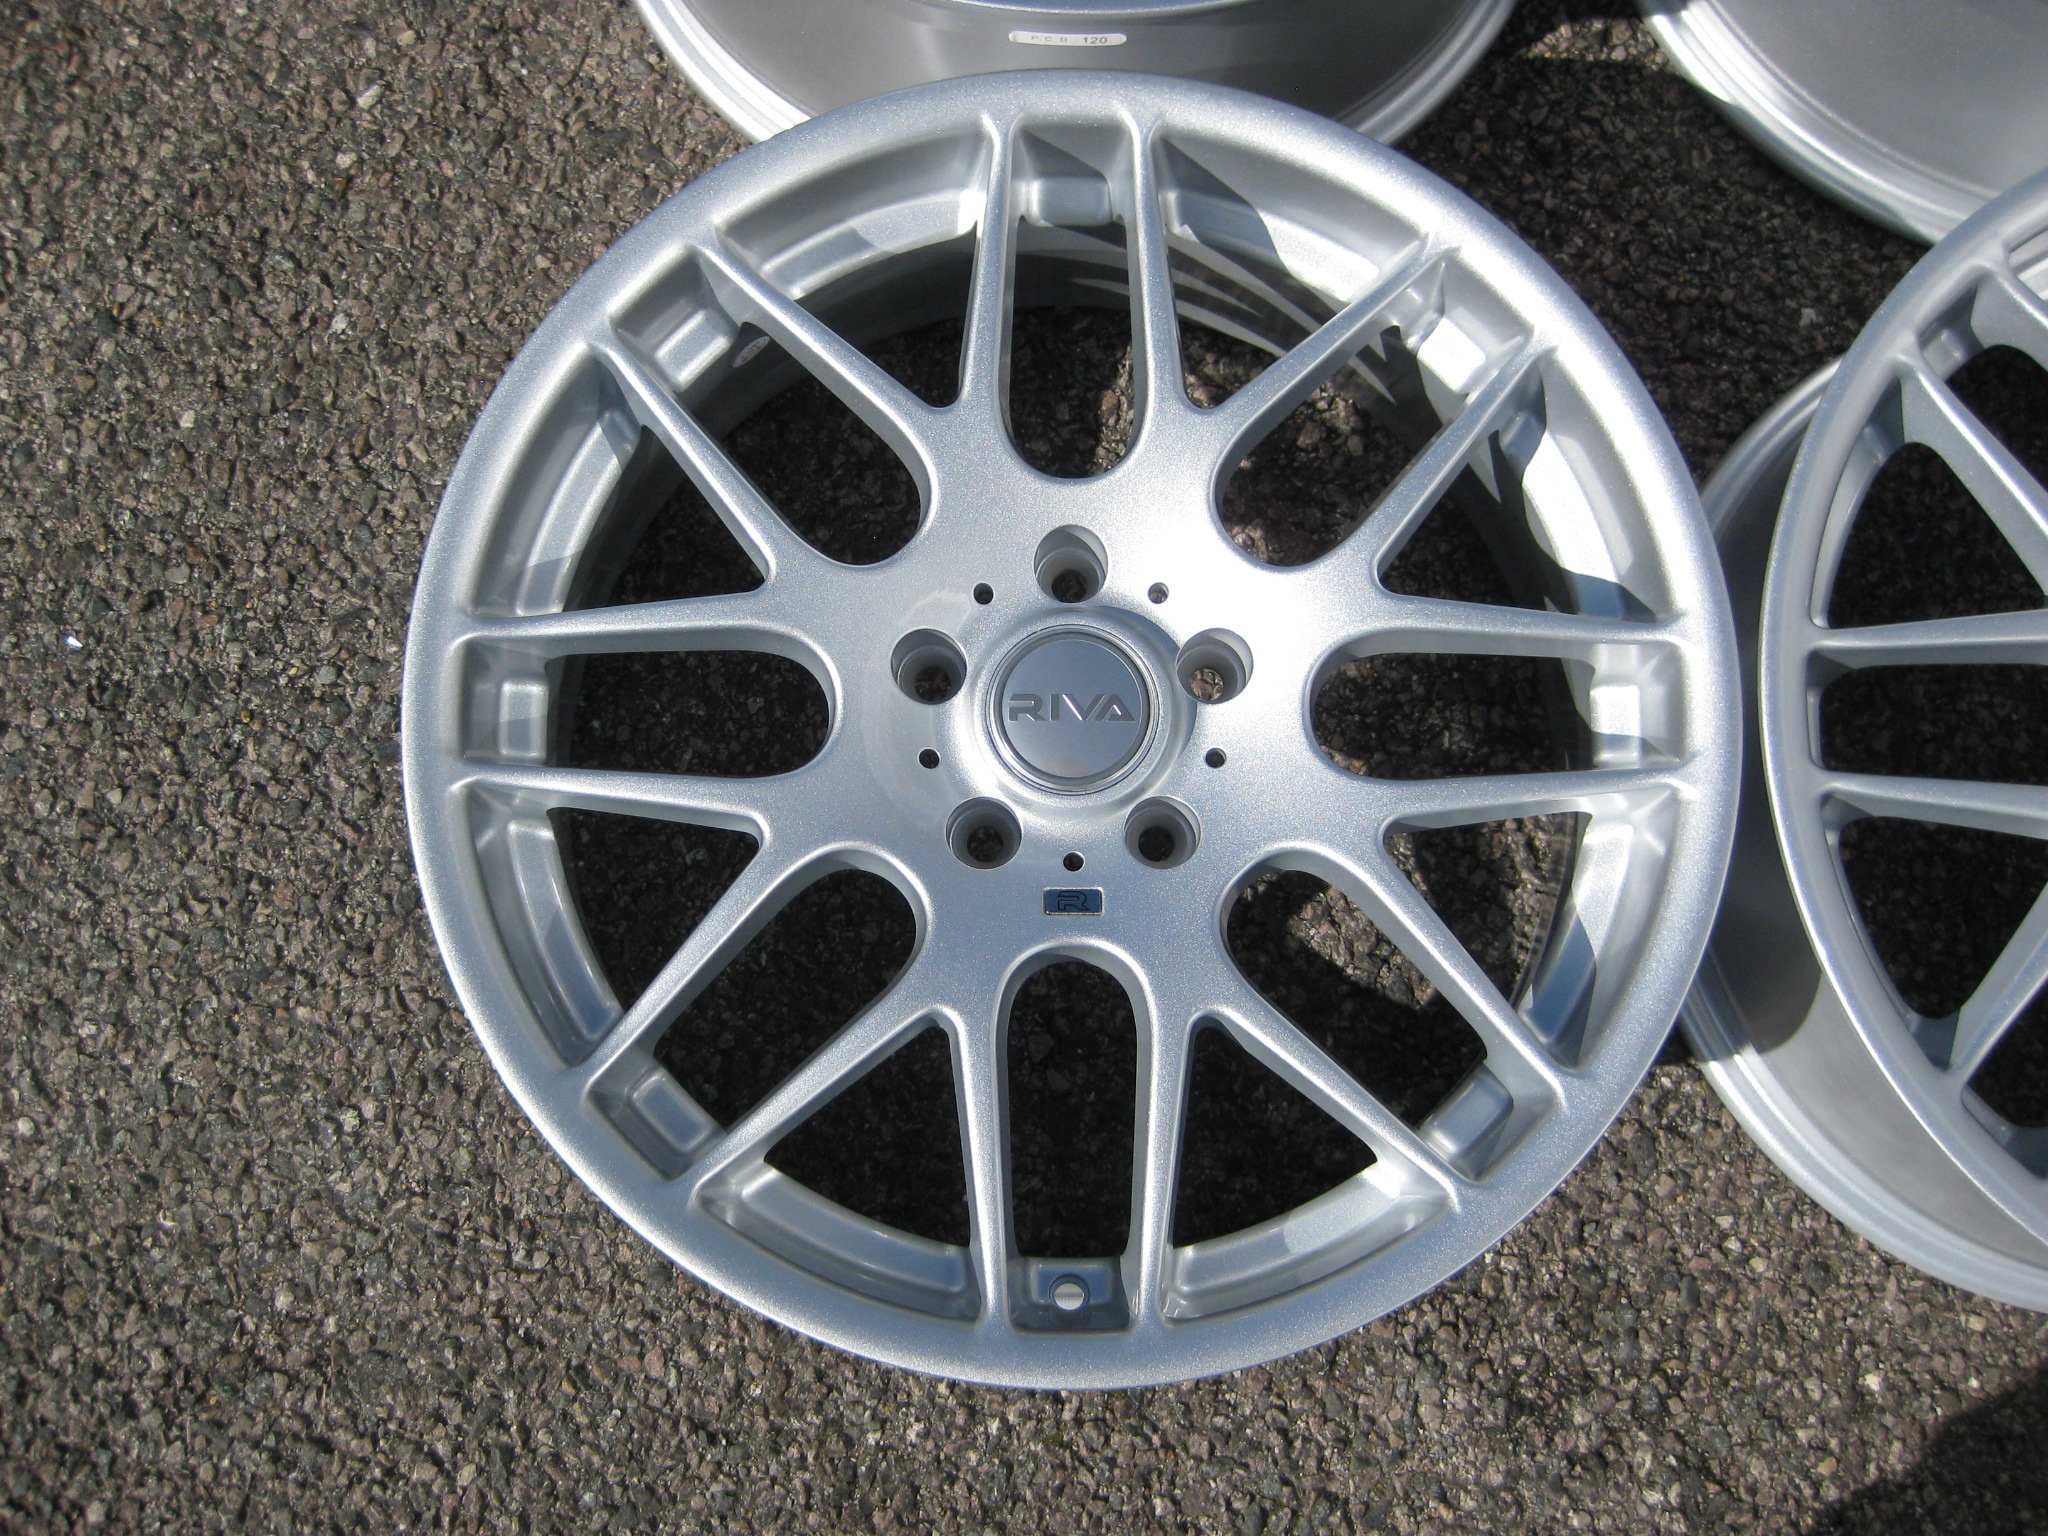 NEW 18" RIVA DTM CSL ALLOY WHEELS FINISHED IN SILVER, DEEPER LOOK, WIDER REAR'S